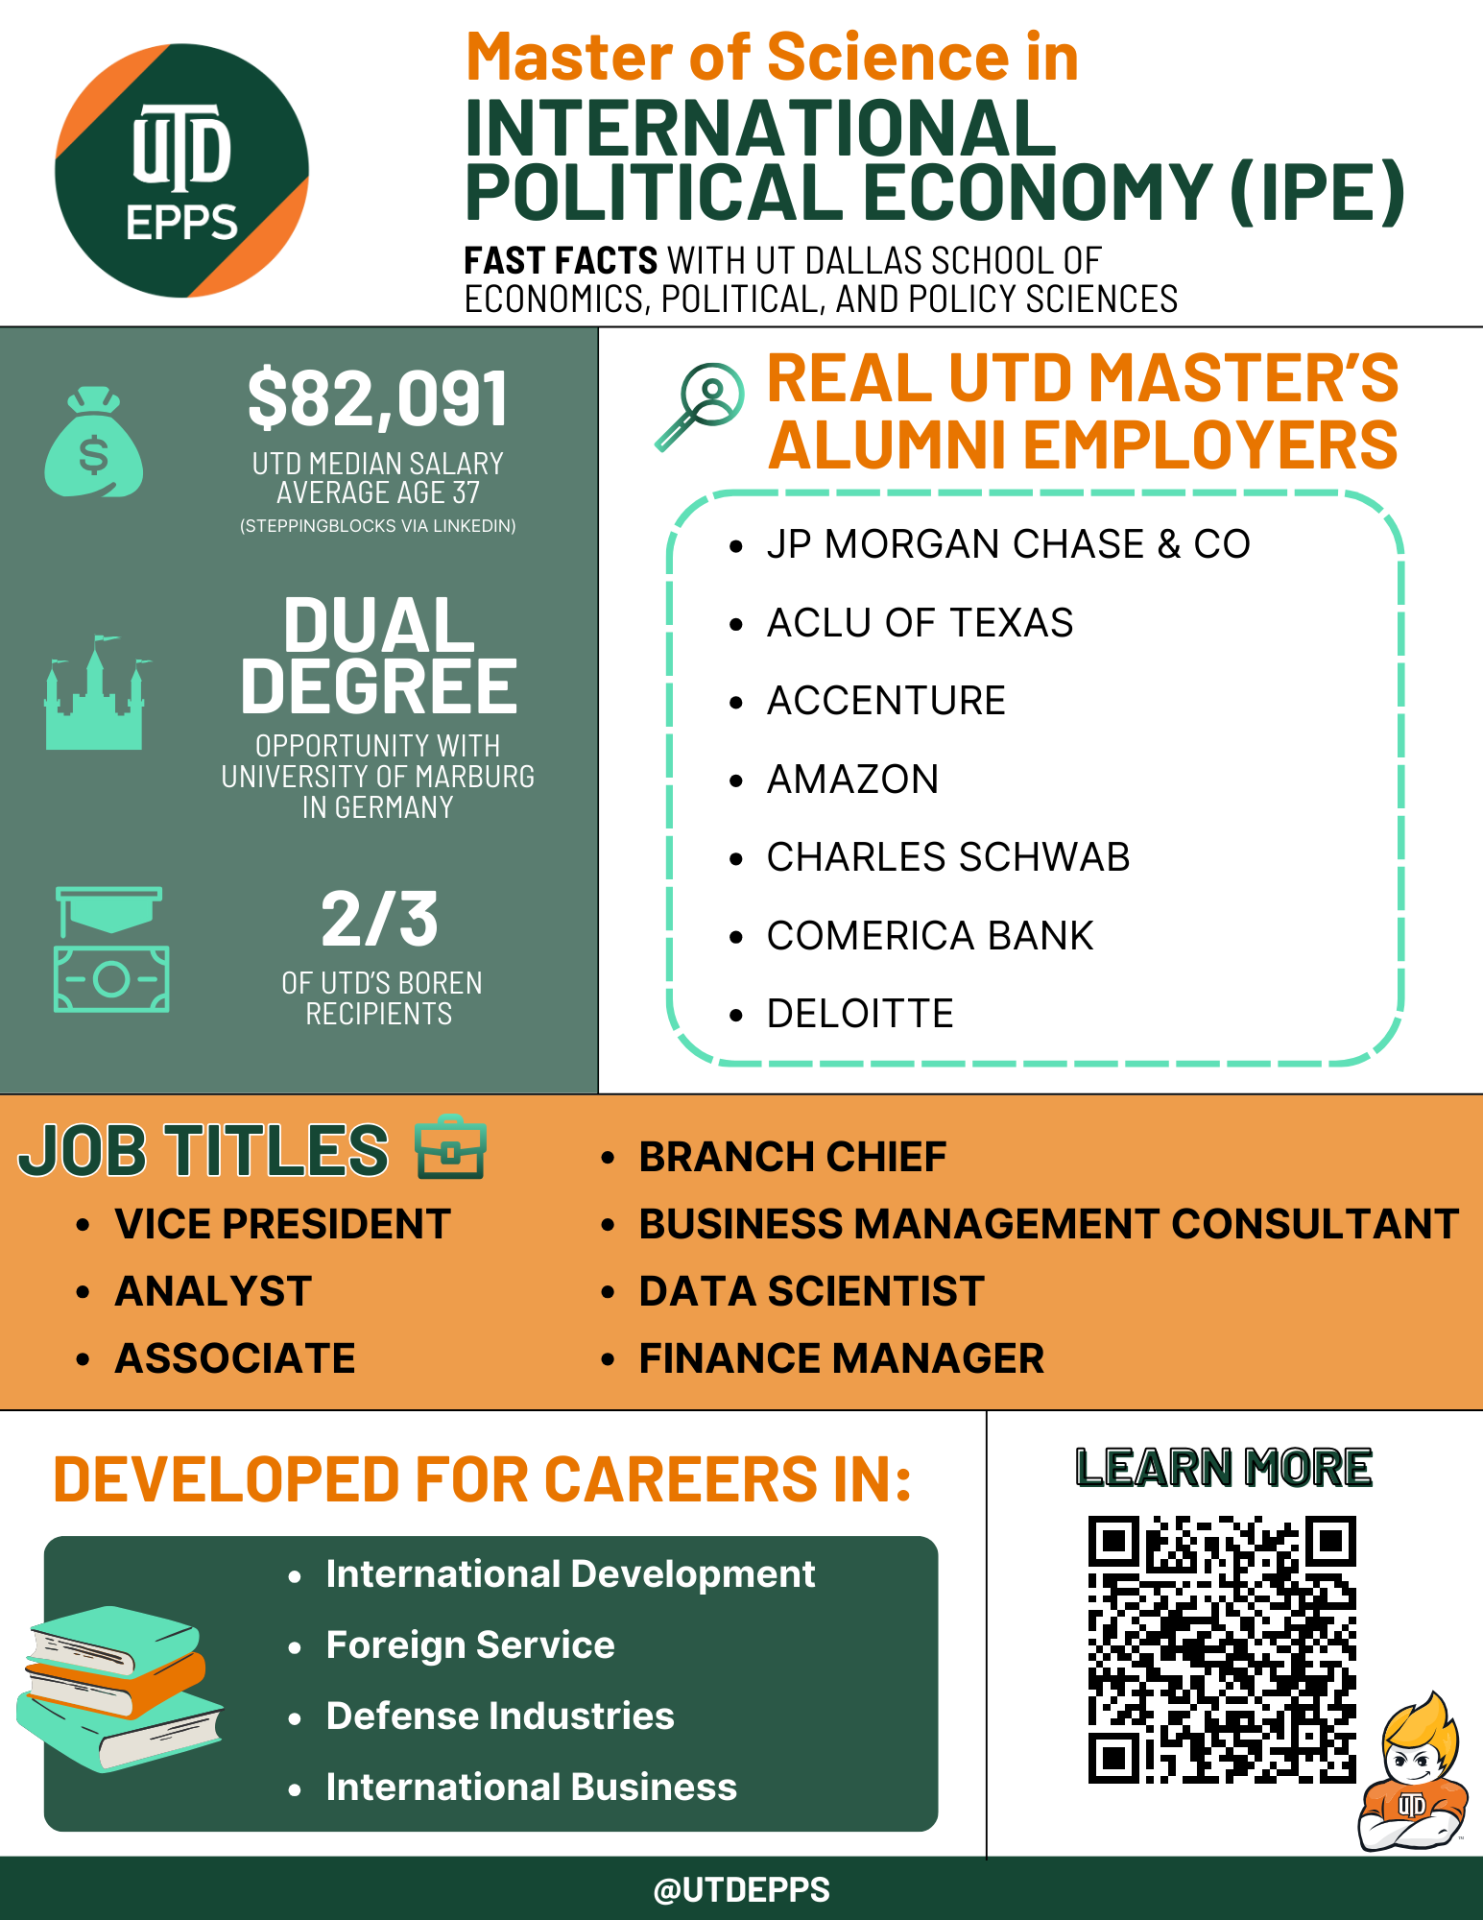 Master of Science in
International Political Economy (IPE). Fast Facts with Ut dallas school of 
economics, political, and policy sciences.

,091 is UTD Median Salary (average age 37). Data is from Steppingblocks via Linkedin. Dual degree opportunity with the University of Marburg in Germany. 2/3
of UTD’s Boren recipients.

REAL UTD MASTER’S ALUMNI EMPLOYERS include:
JP Morgan Chase & Co
ACLU of Texas
Accenture
Amazon
Charles Schwab
Comerica Bank
Deloitte

Job titles include: 
Vice President
Analyst
Associate
Branch Chief
Business Management Consultant
Data Scientist
Finance Manager

Developed for careers in: International Development
Foreign Service
Defense Industries
International Business

Learn more by scanning the QR code. 

@UTDEPPS